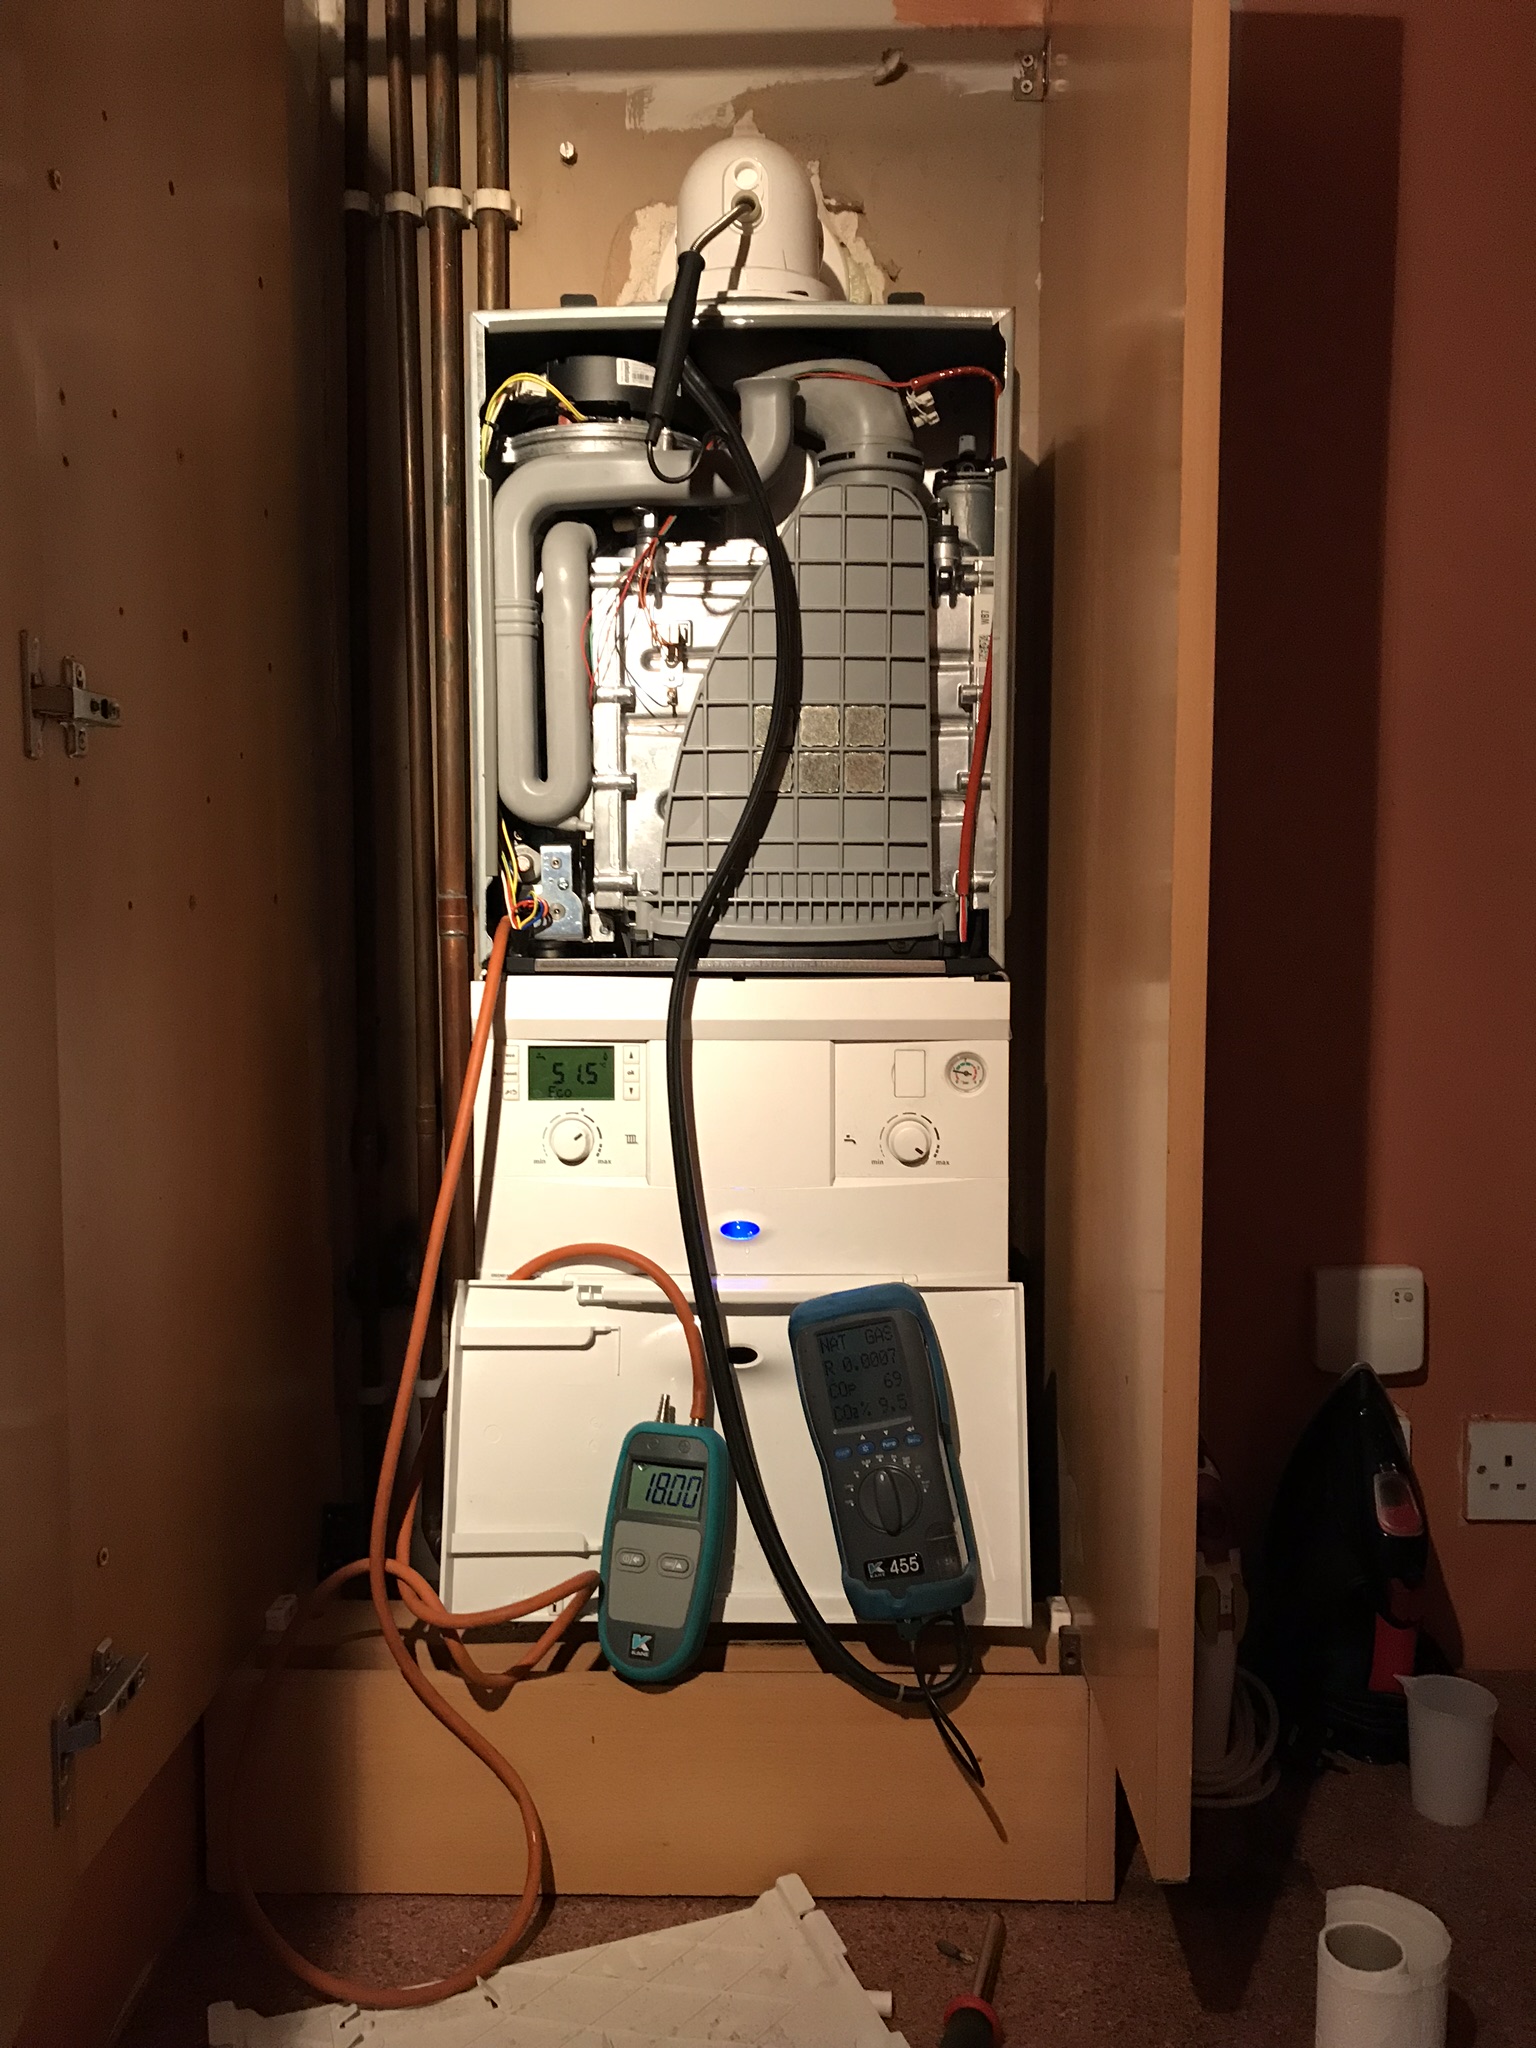 Why Does My Boiler Need An Annual Service?